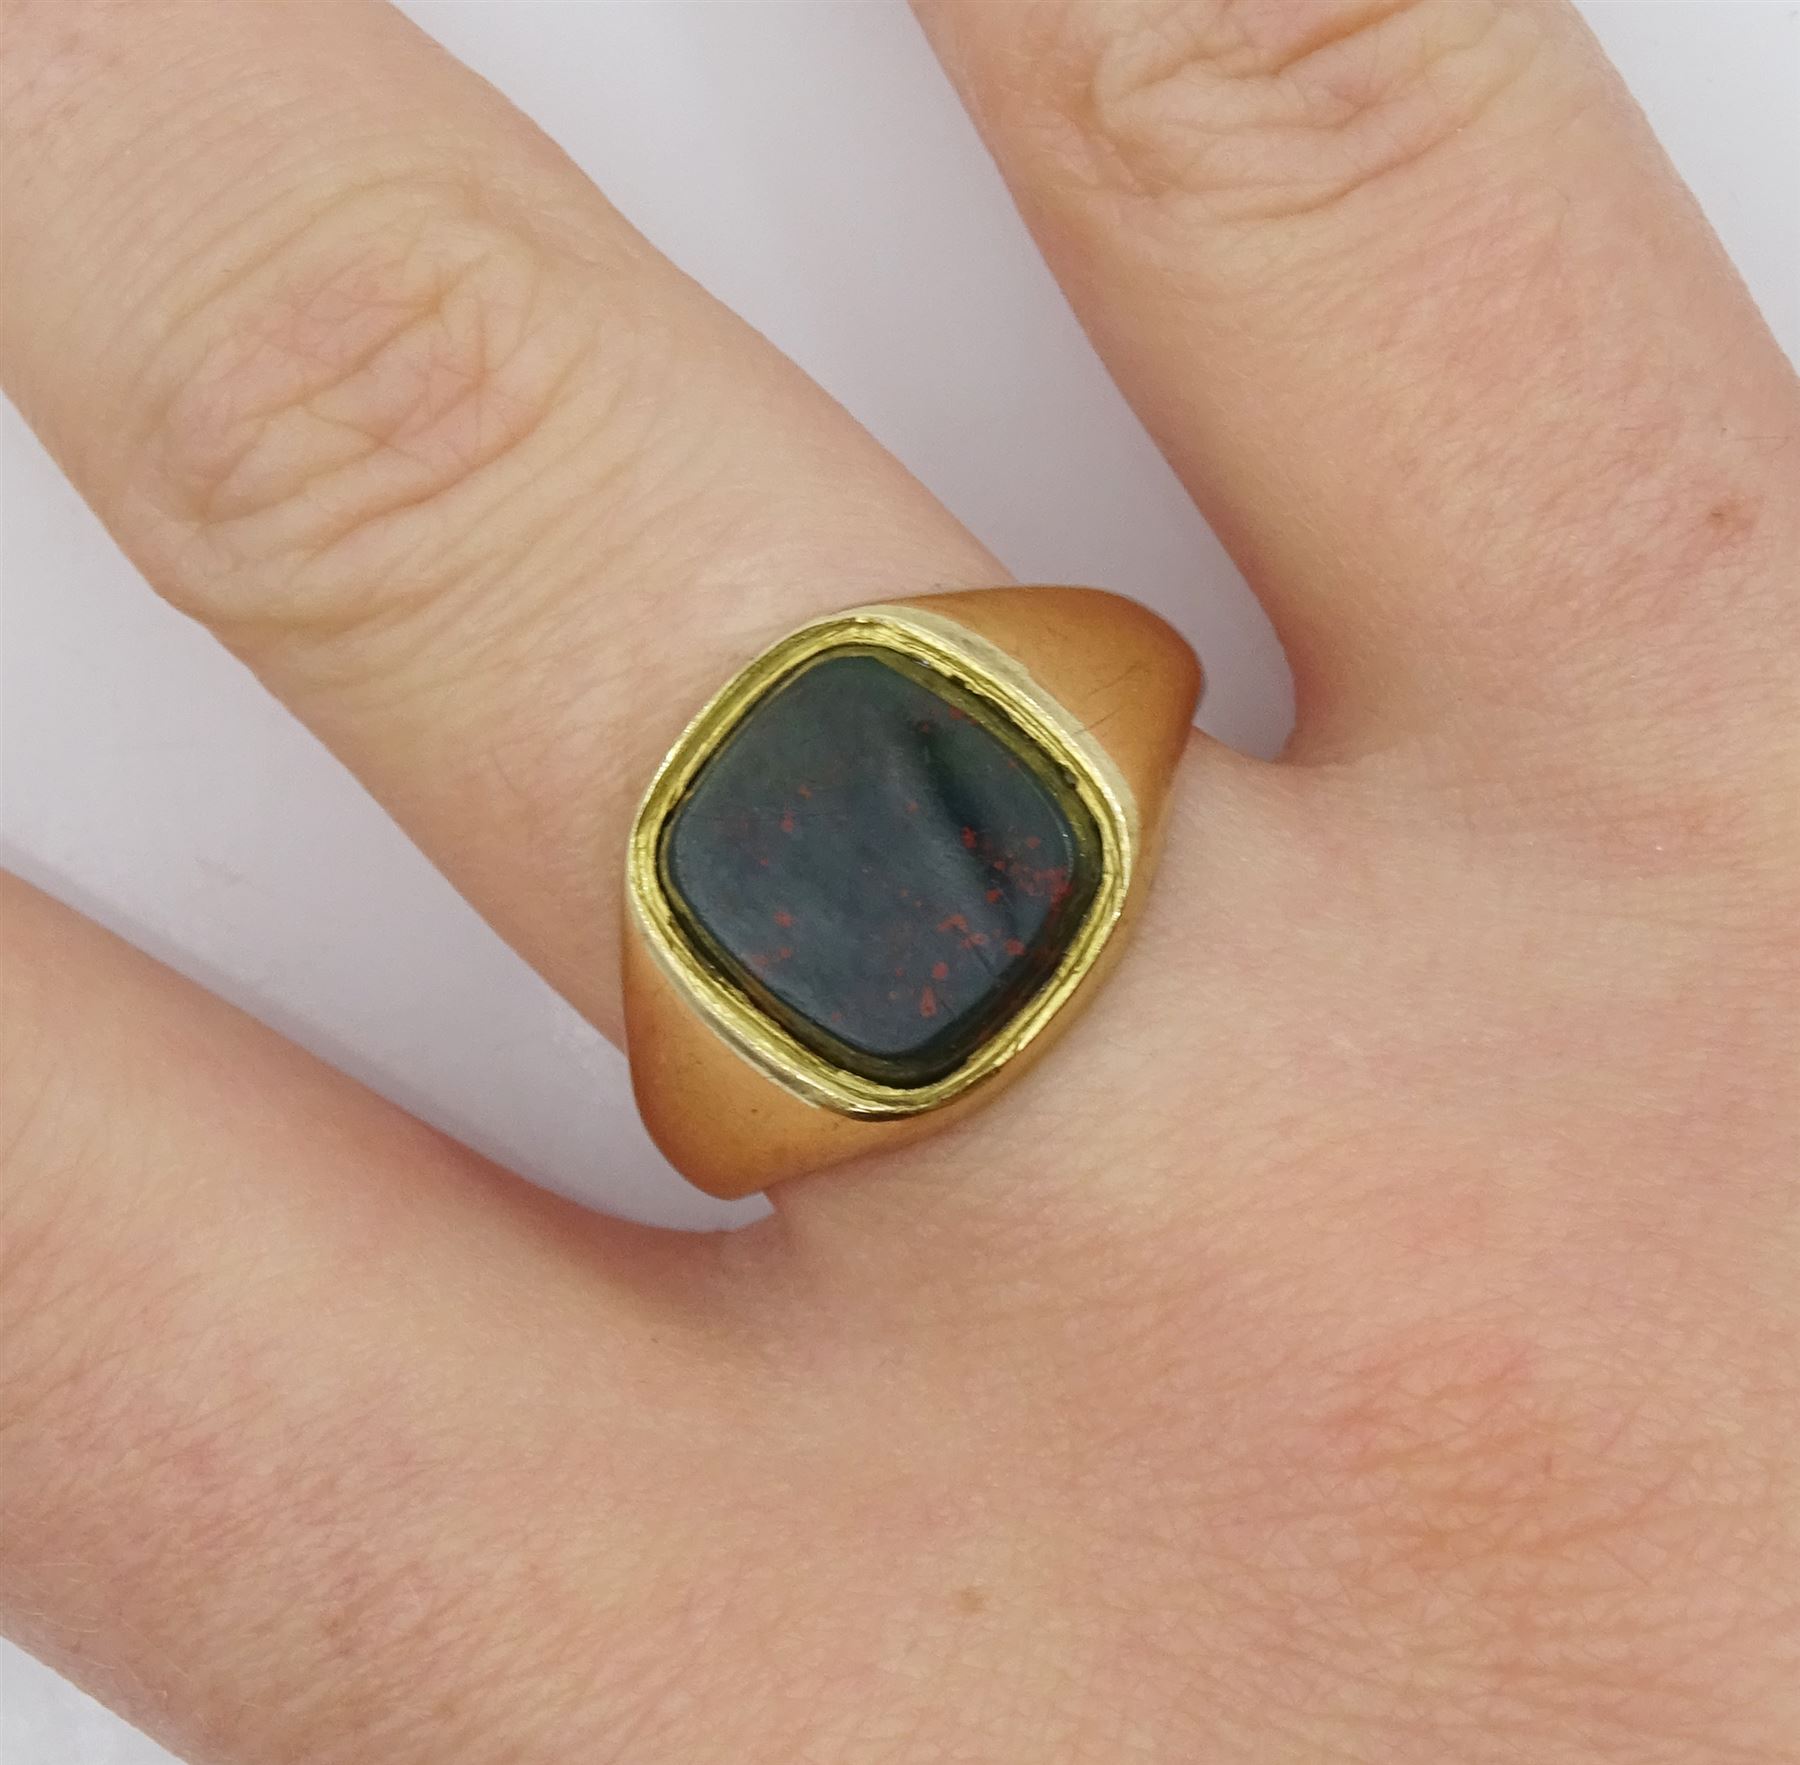 9ct gold bloodstone signet ring - Image 2 of 4